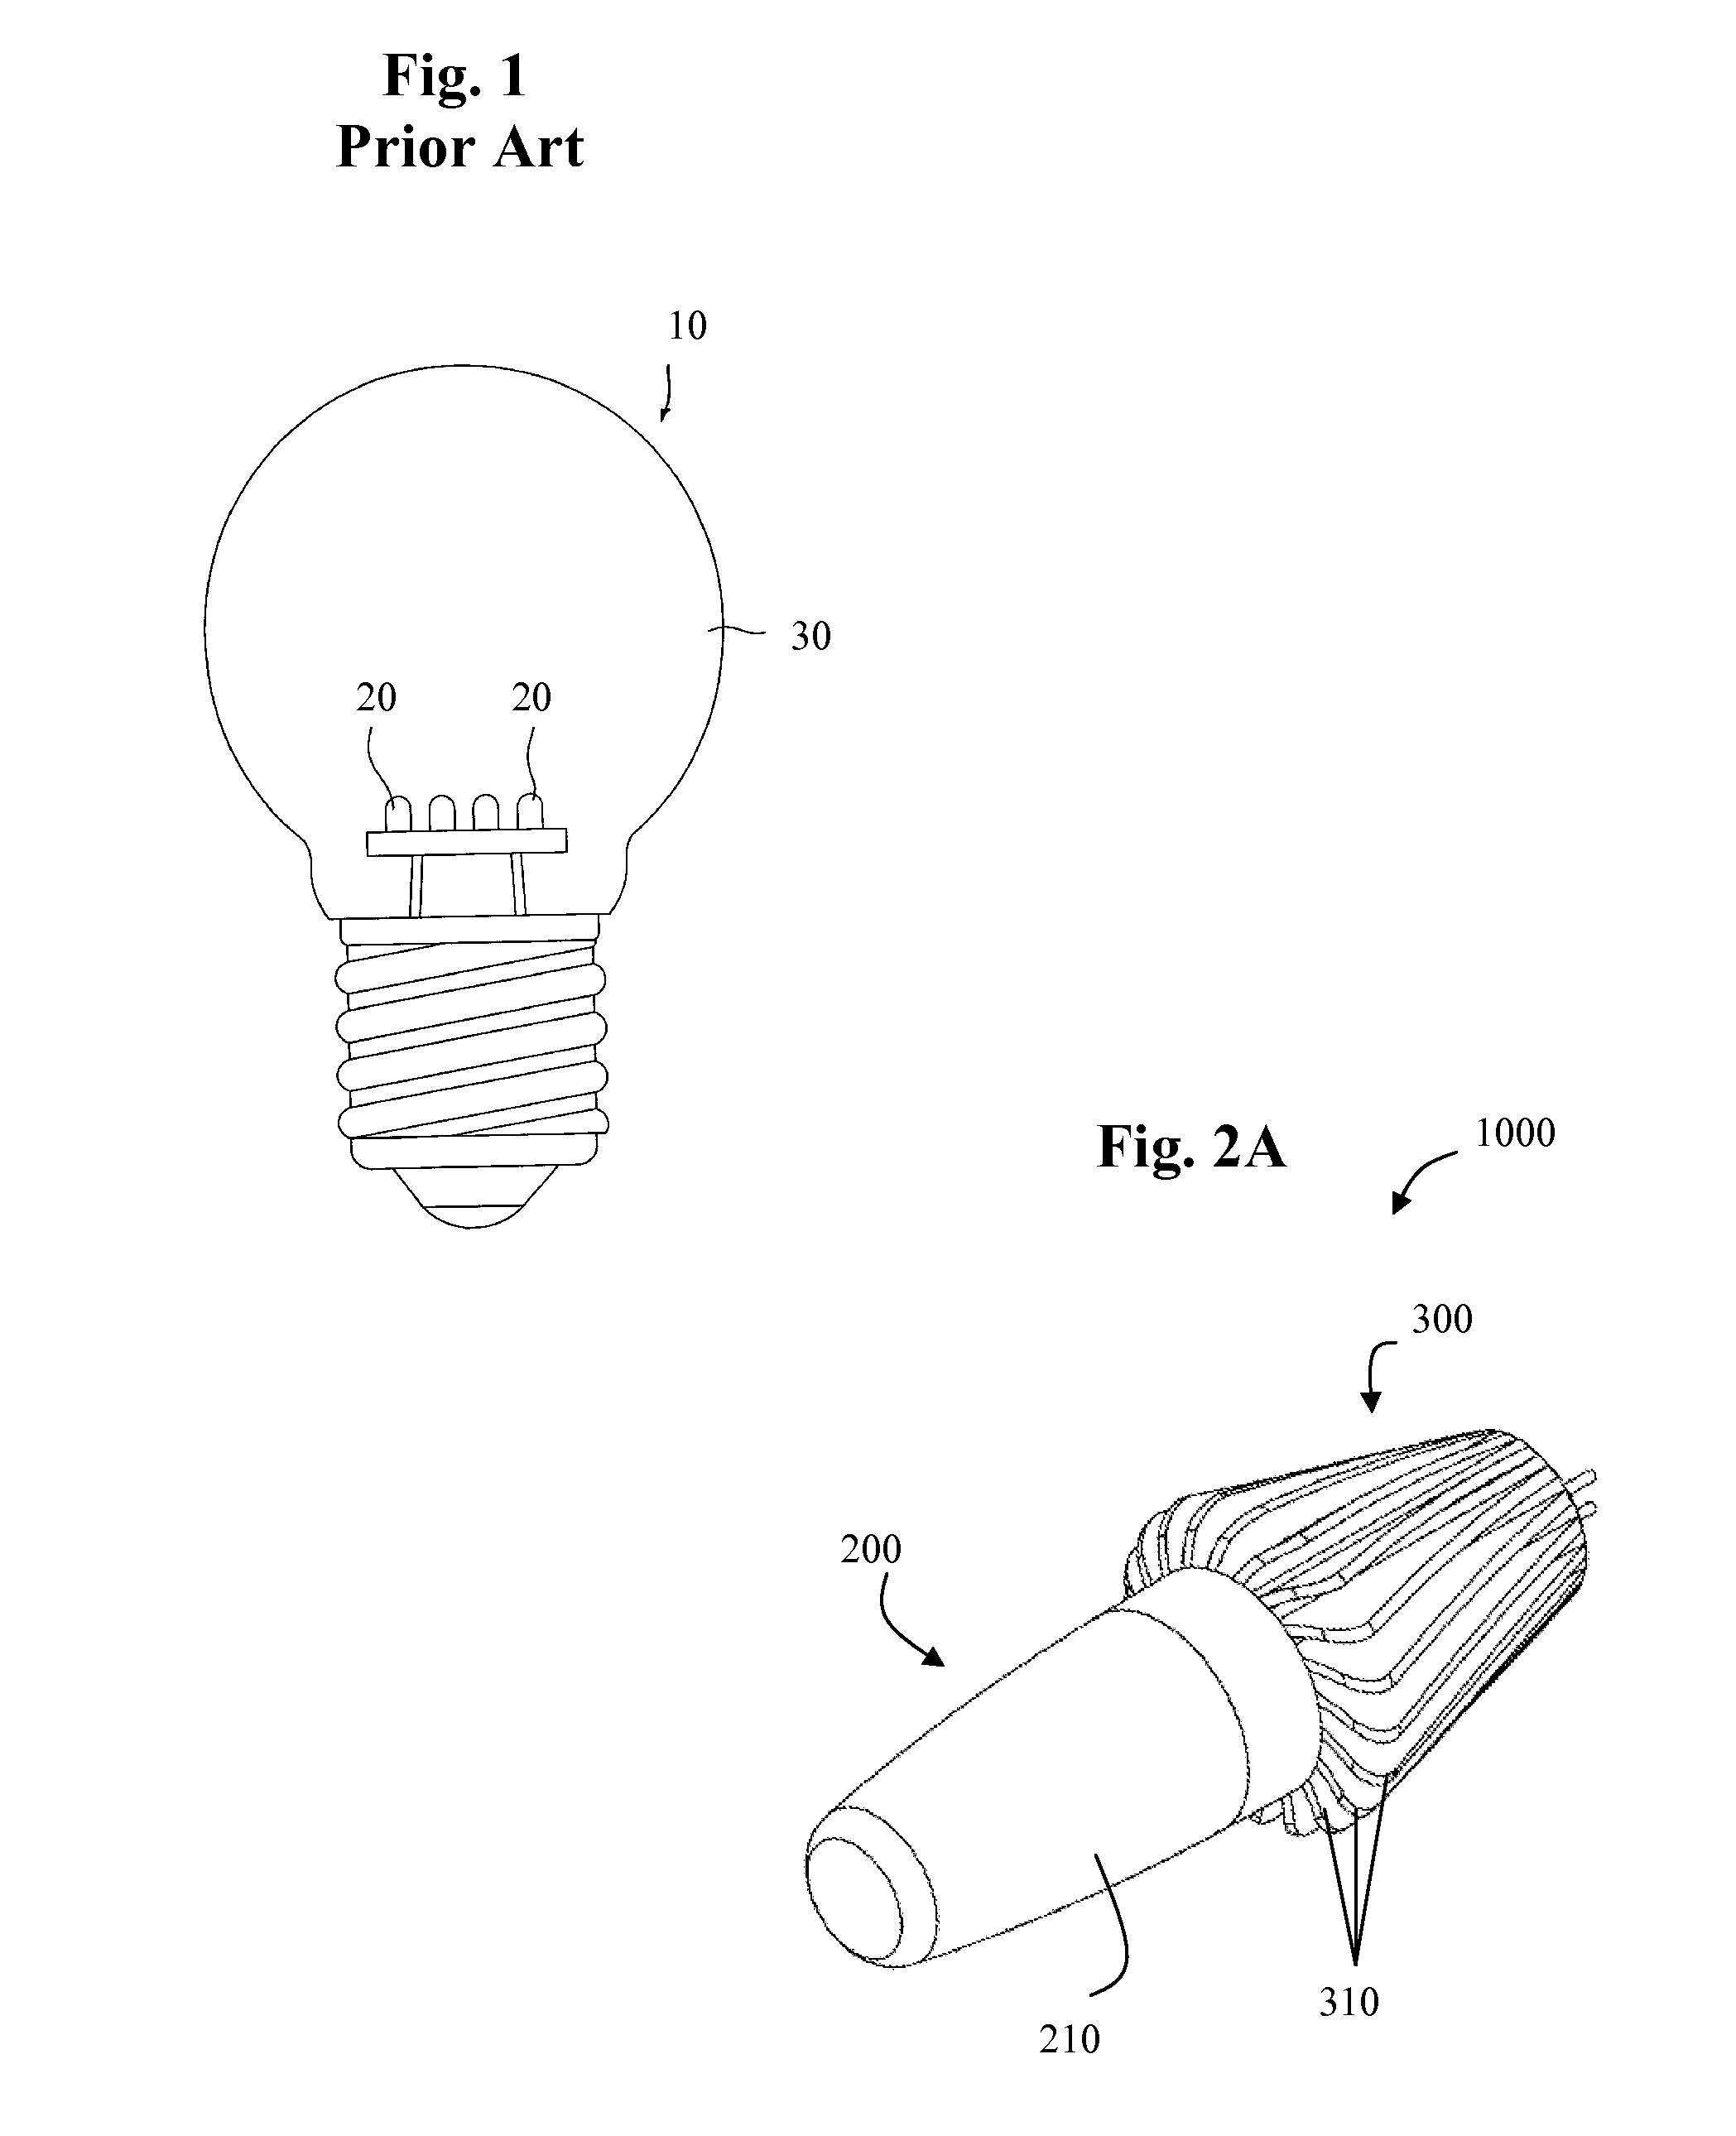 Illumination apparatus for conducting and dissipating heat from a light source